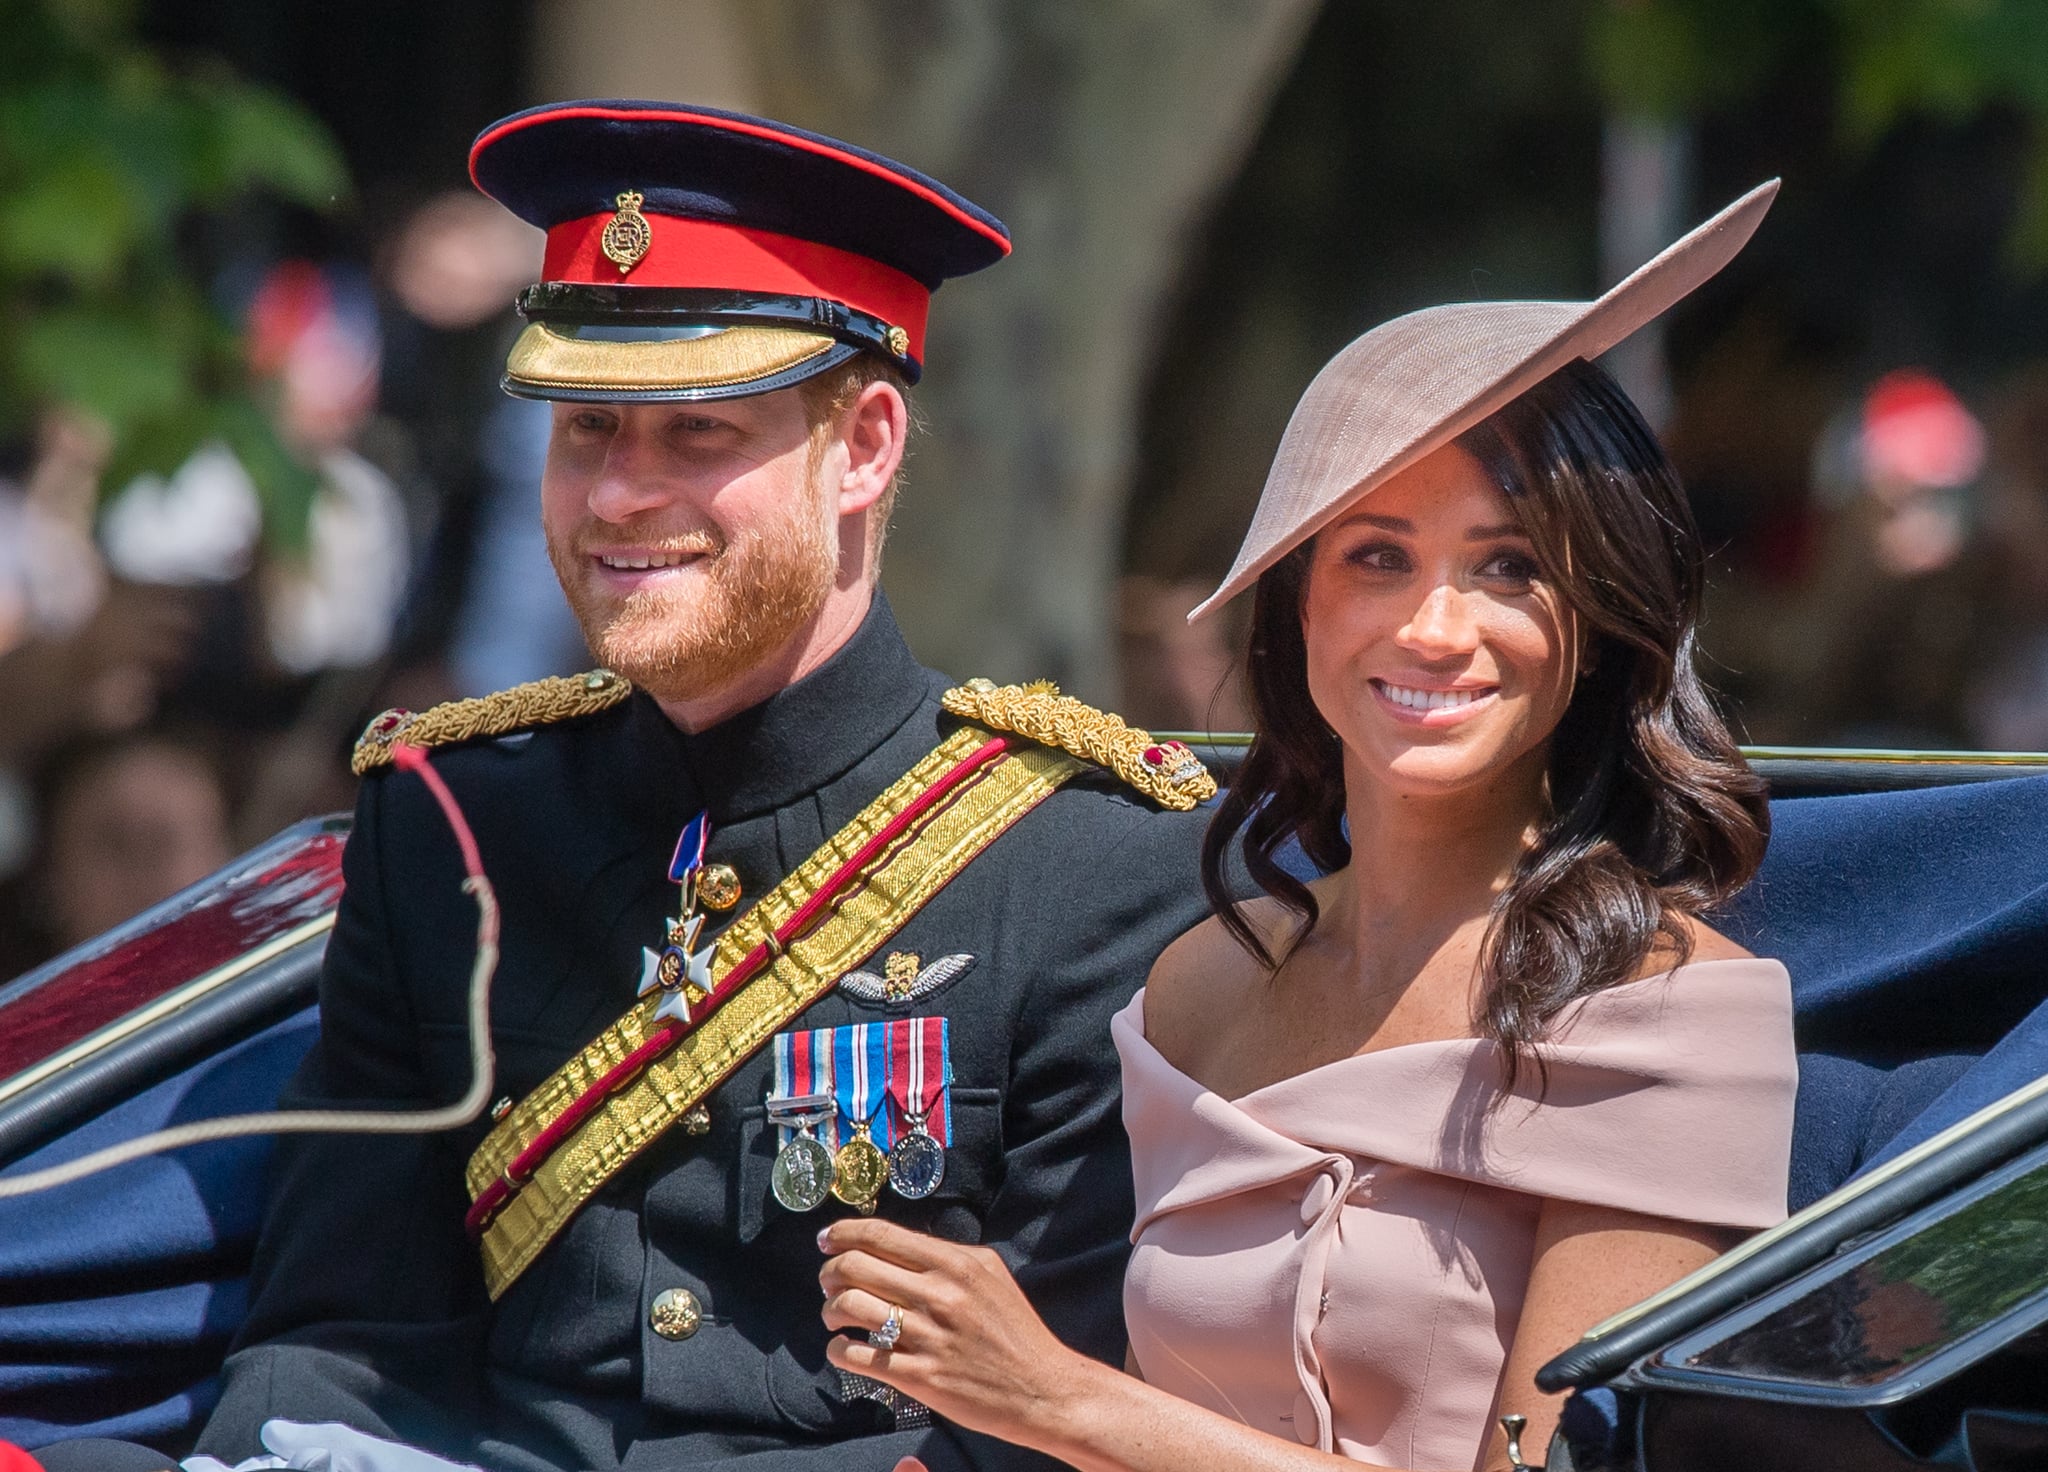 LONDON, ENGLAND - JUNE 09:  Prince Harry, Duke of Sussex and Meghan, Duchess of Sussex ride by carriage during Trooping The Colour 2018 on the Mall on June 9, 2018 in London, England.  (Photo by Samir Hussein/Samir Hussein/WireImage)